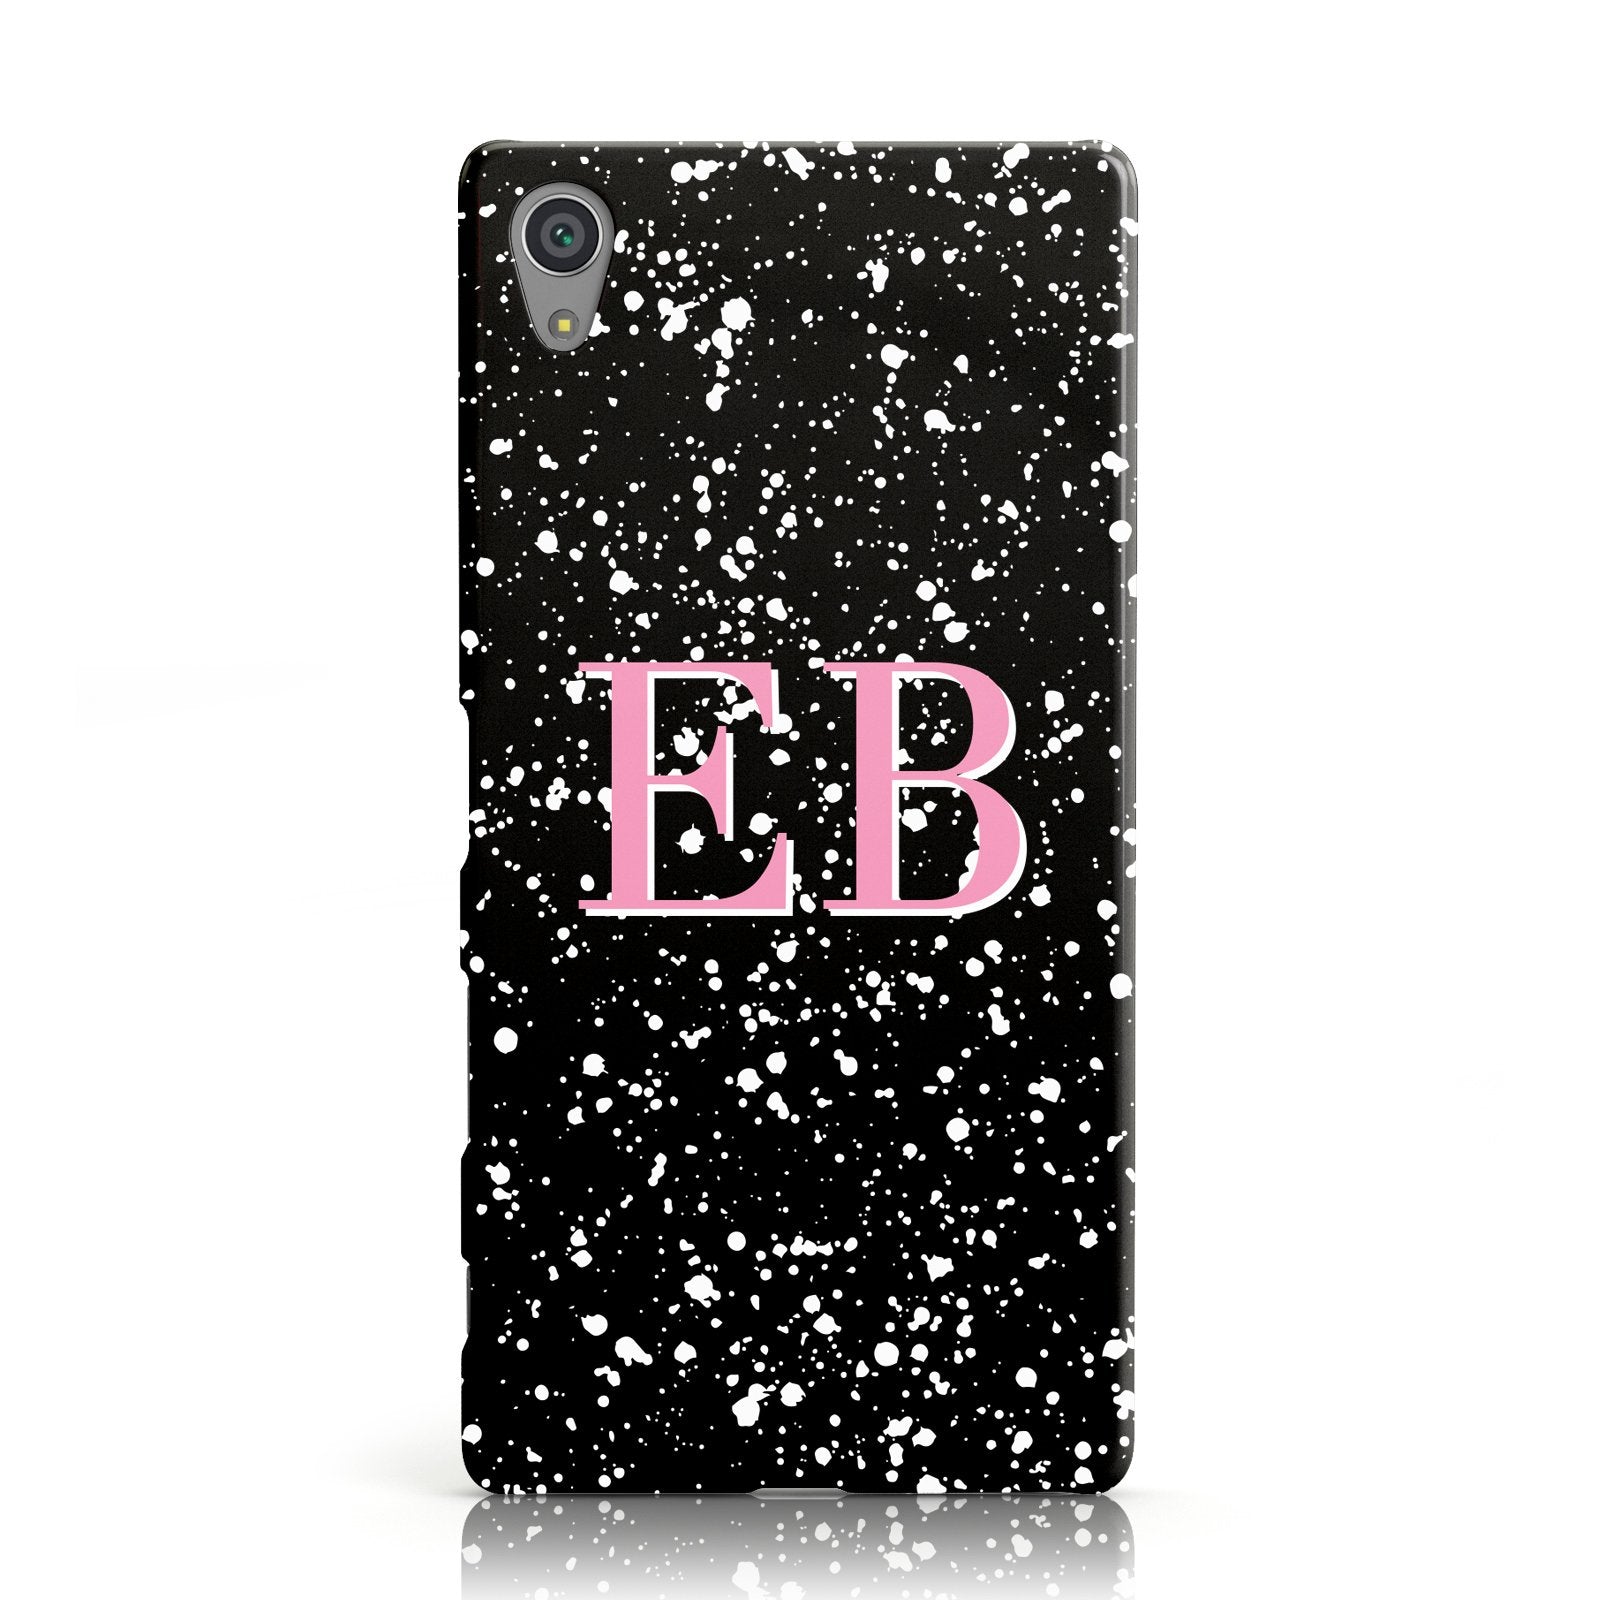 Personalised Black Ink Splat & Initials Sony Xperia Case